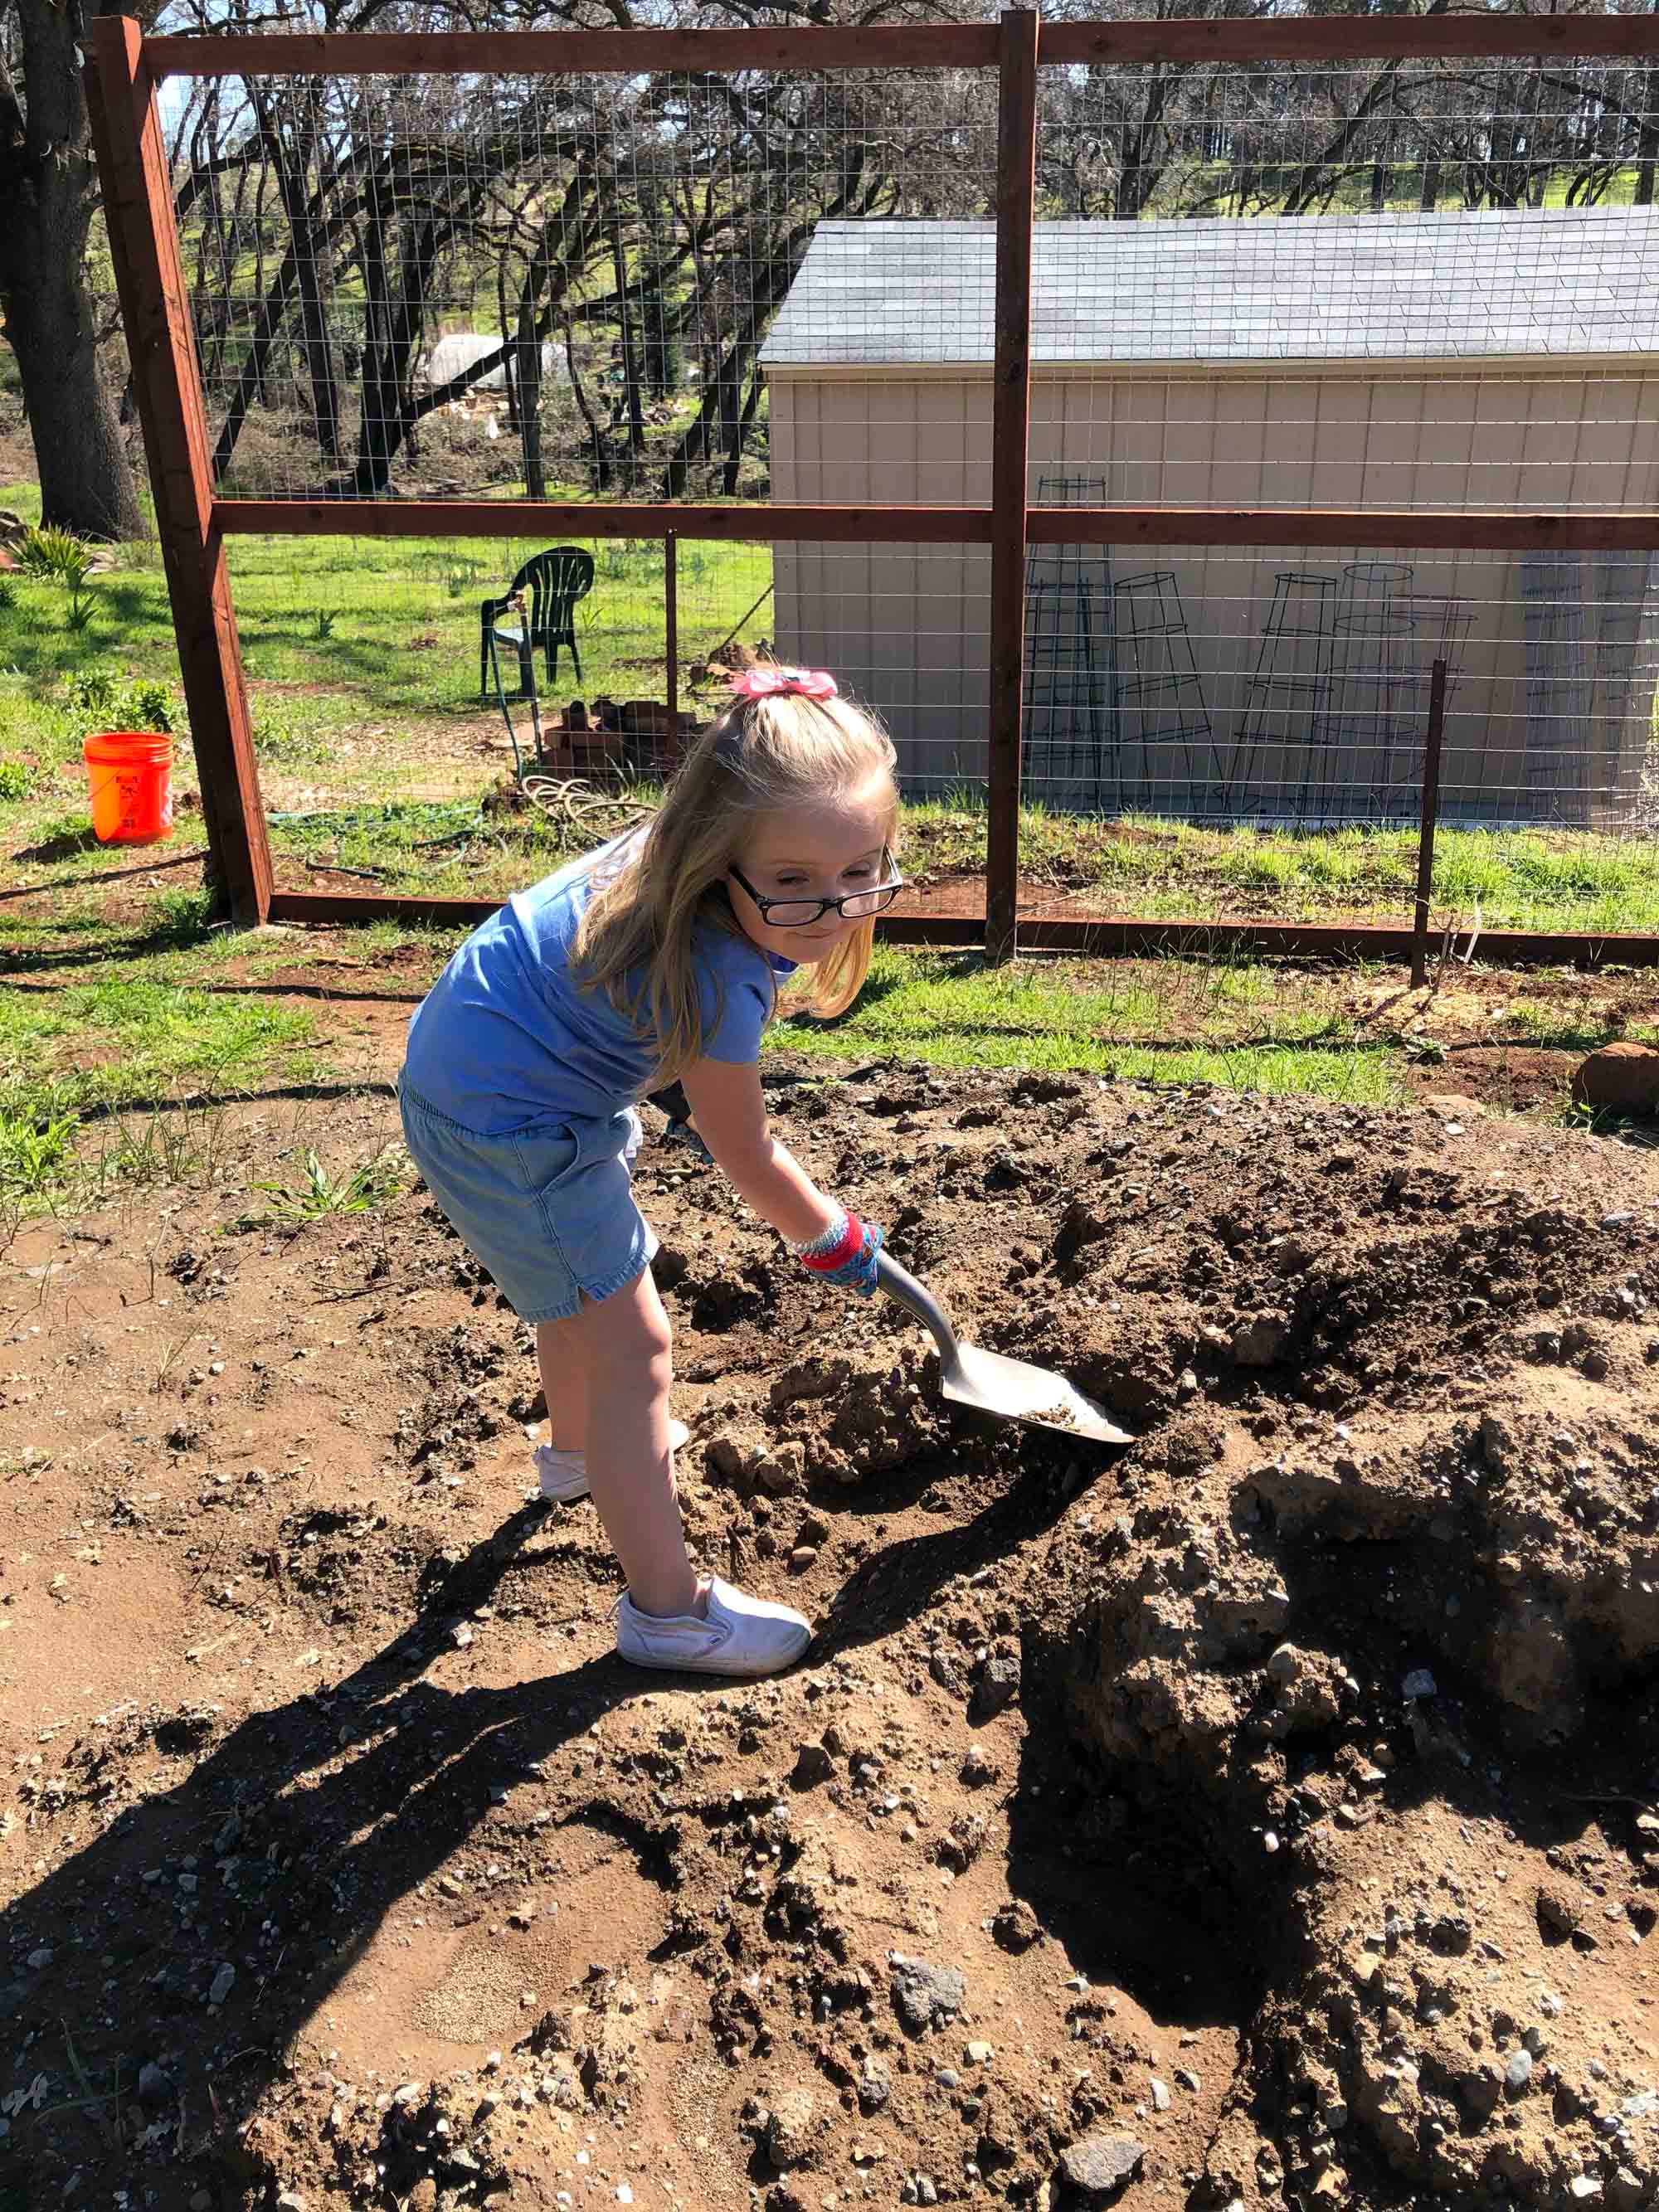 Digging Into Play With Edible Play Dirt